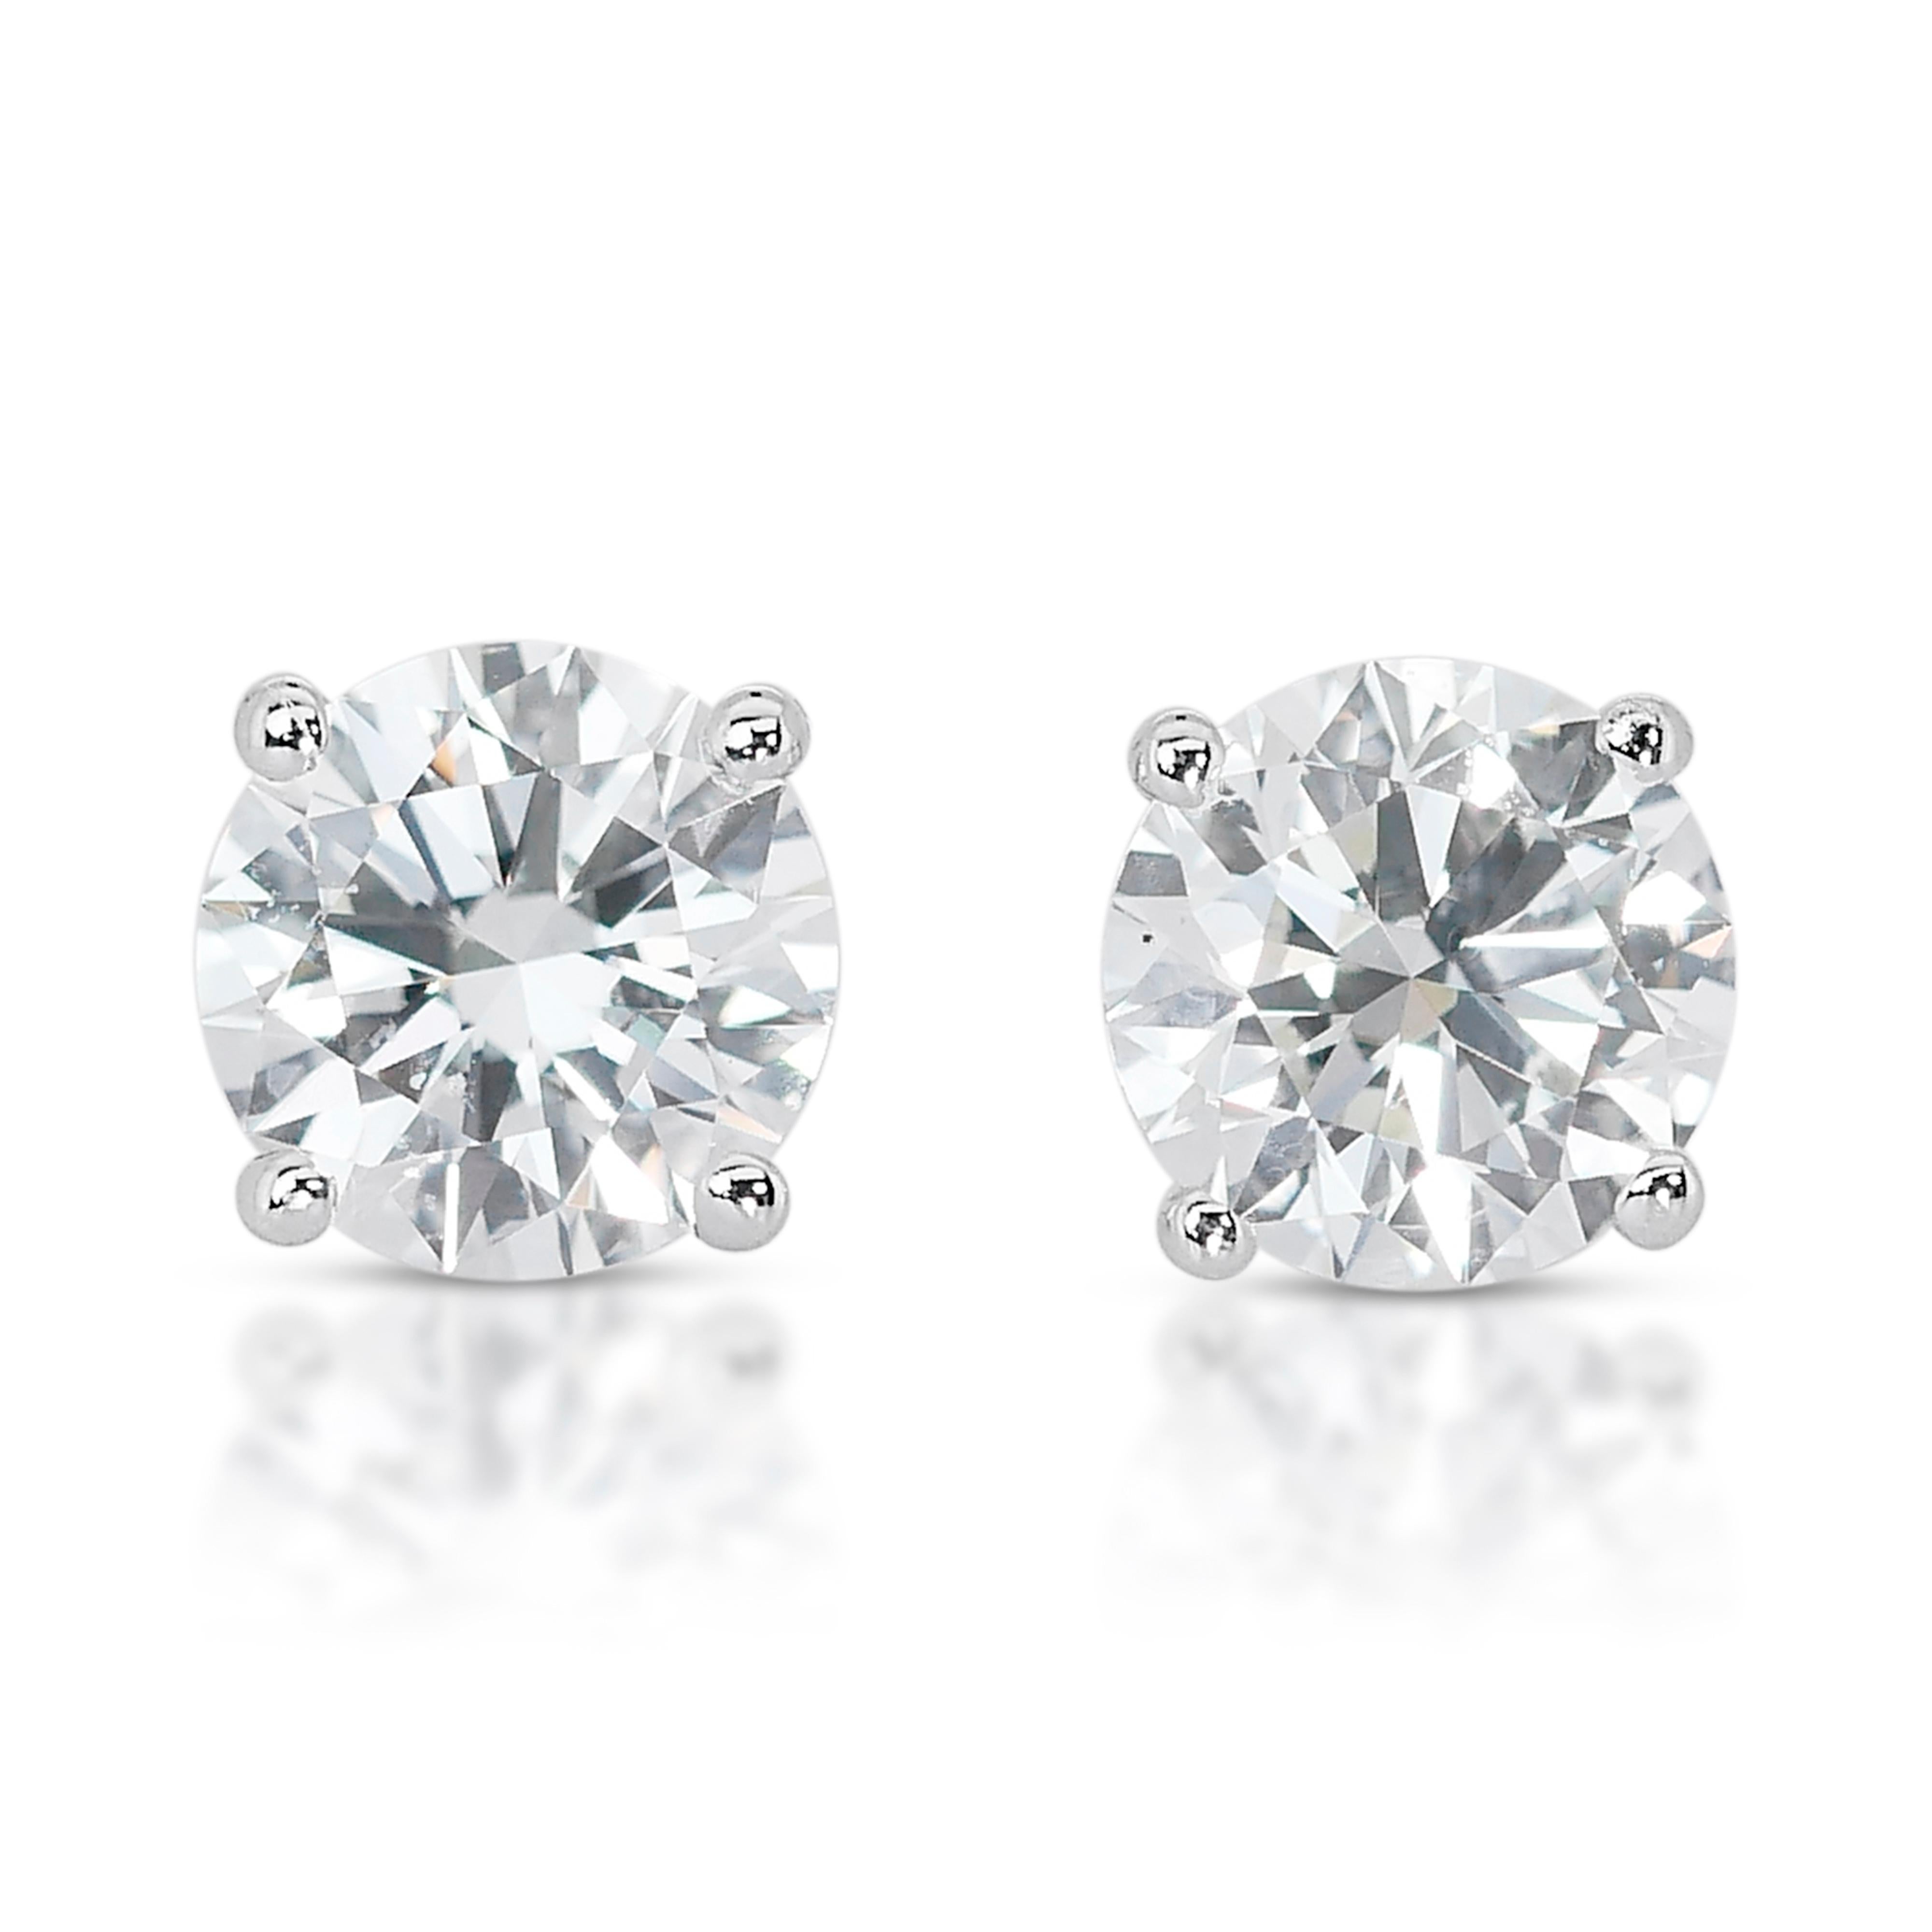 Gleaming 18k White Gold Natural Diamond Stud Earrings w/3.10 ct - GIA Certified For Sale 3